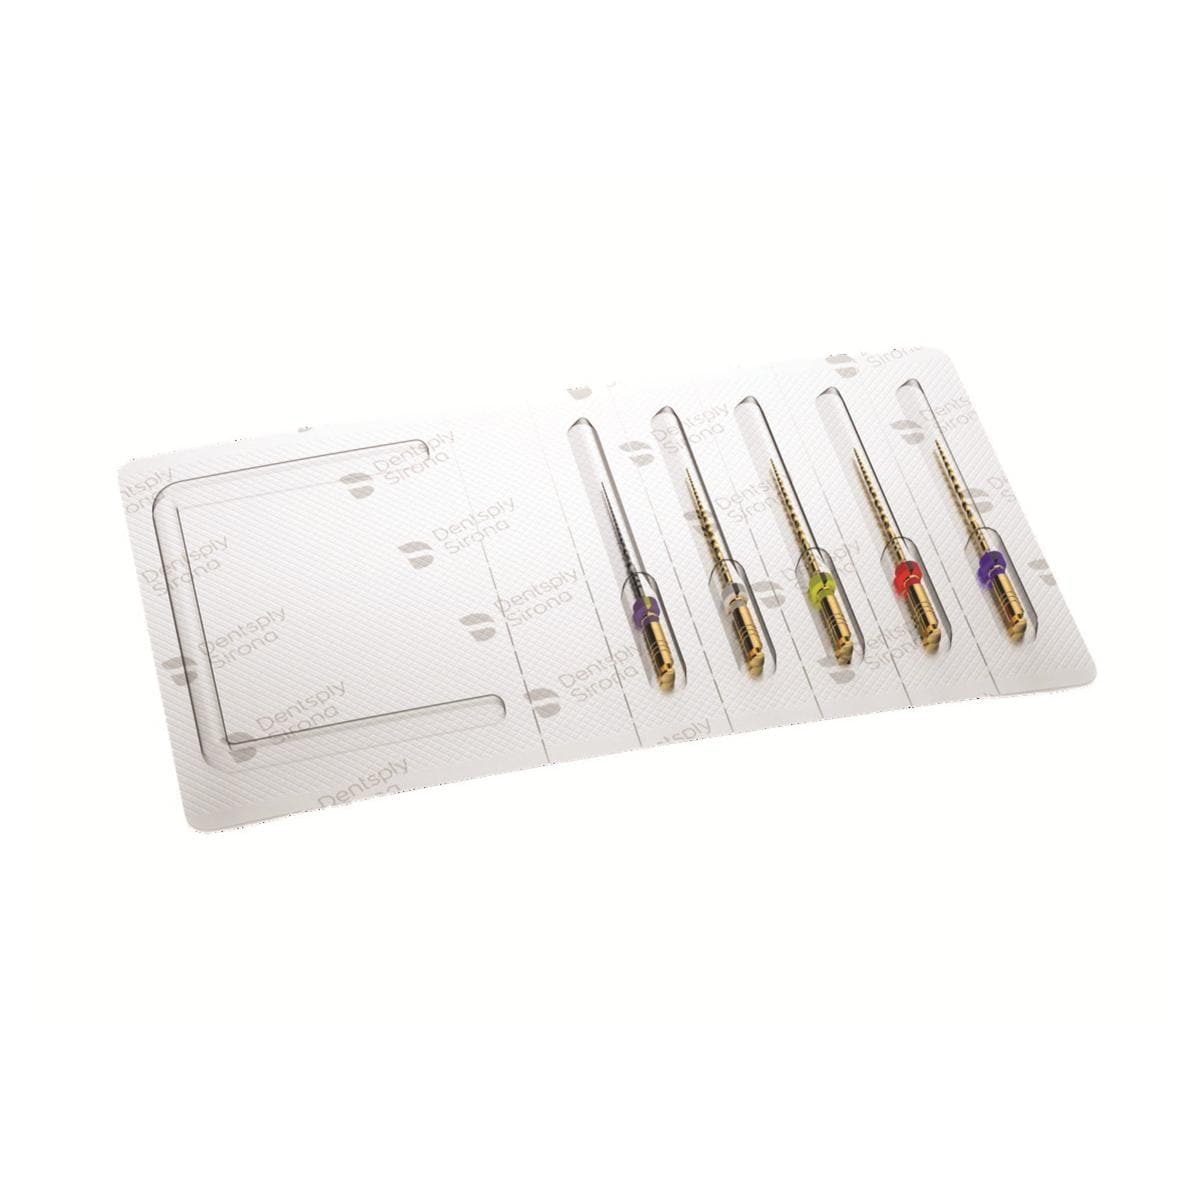 ProTaper Ultimate - Squence - 21mm - Blister de 5 - DENTSPLY SIRONA